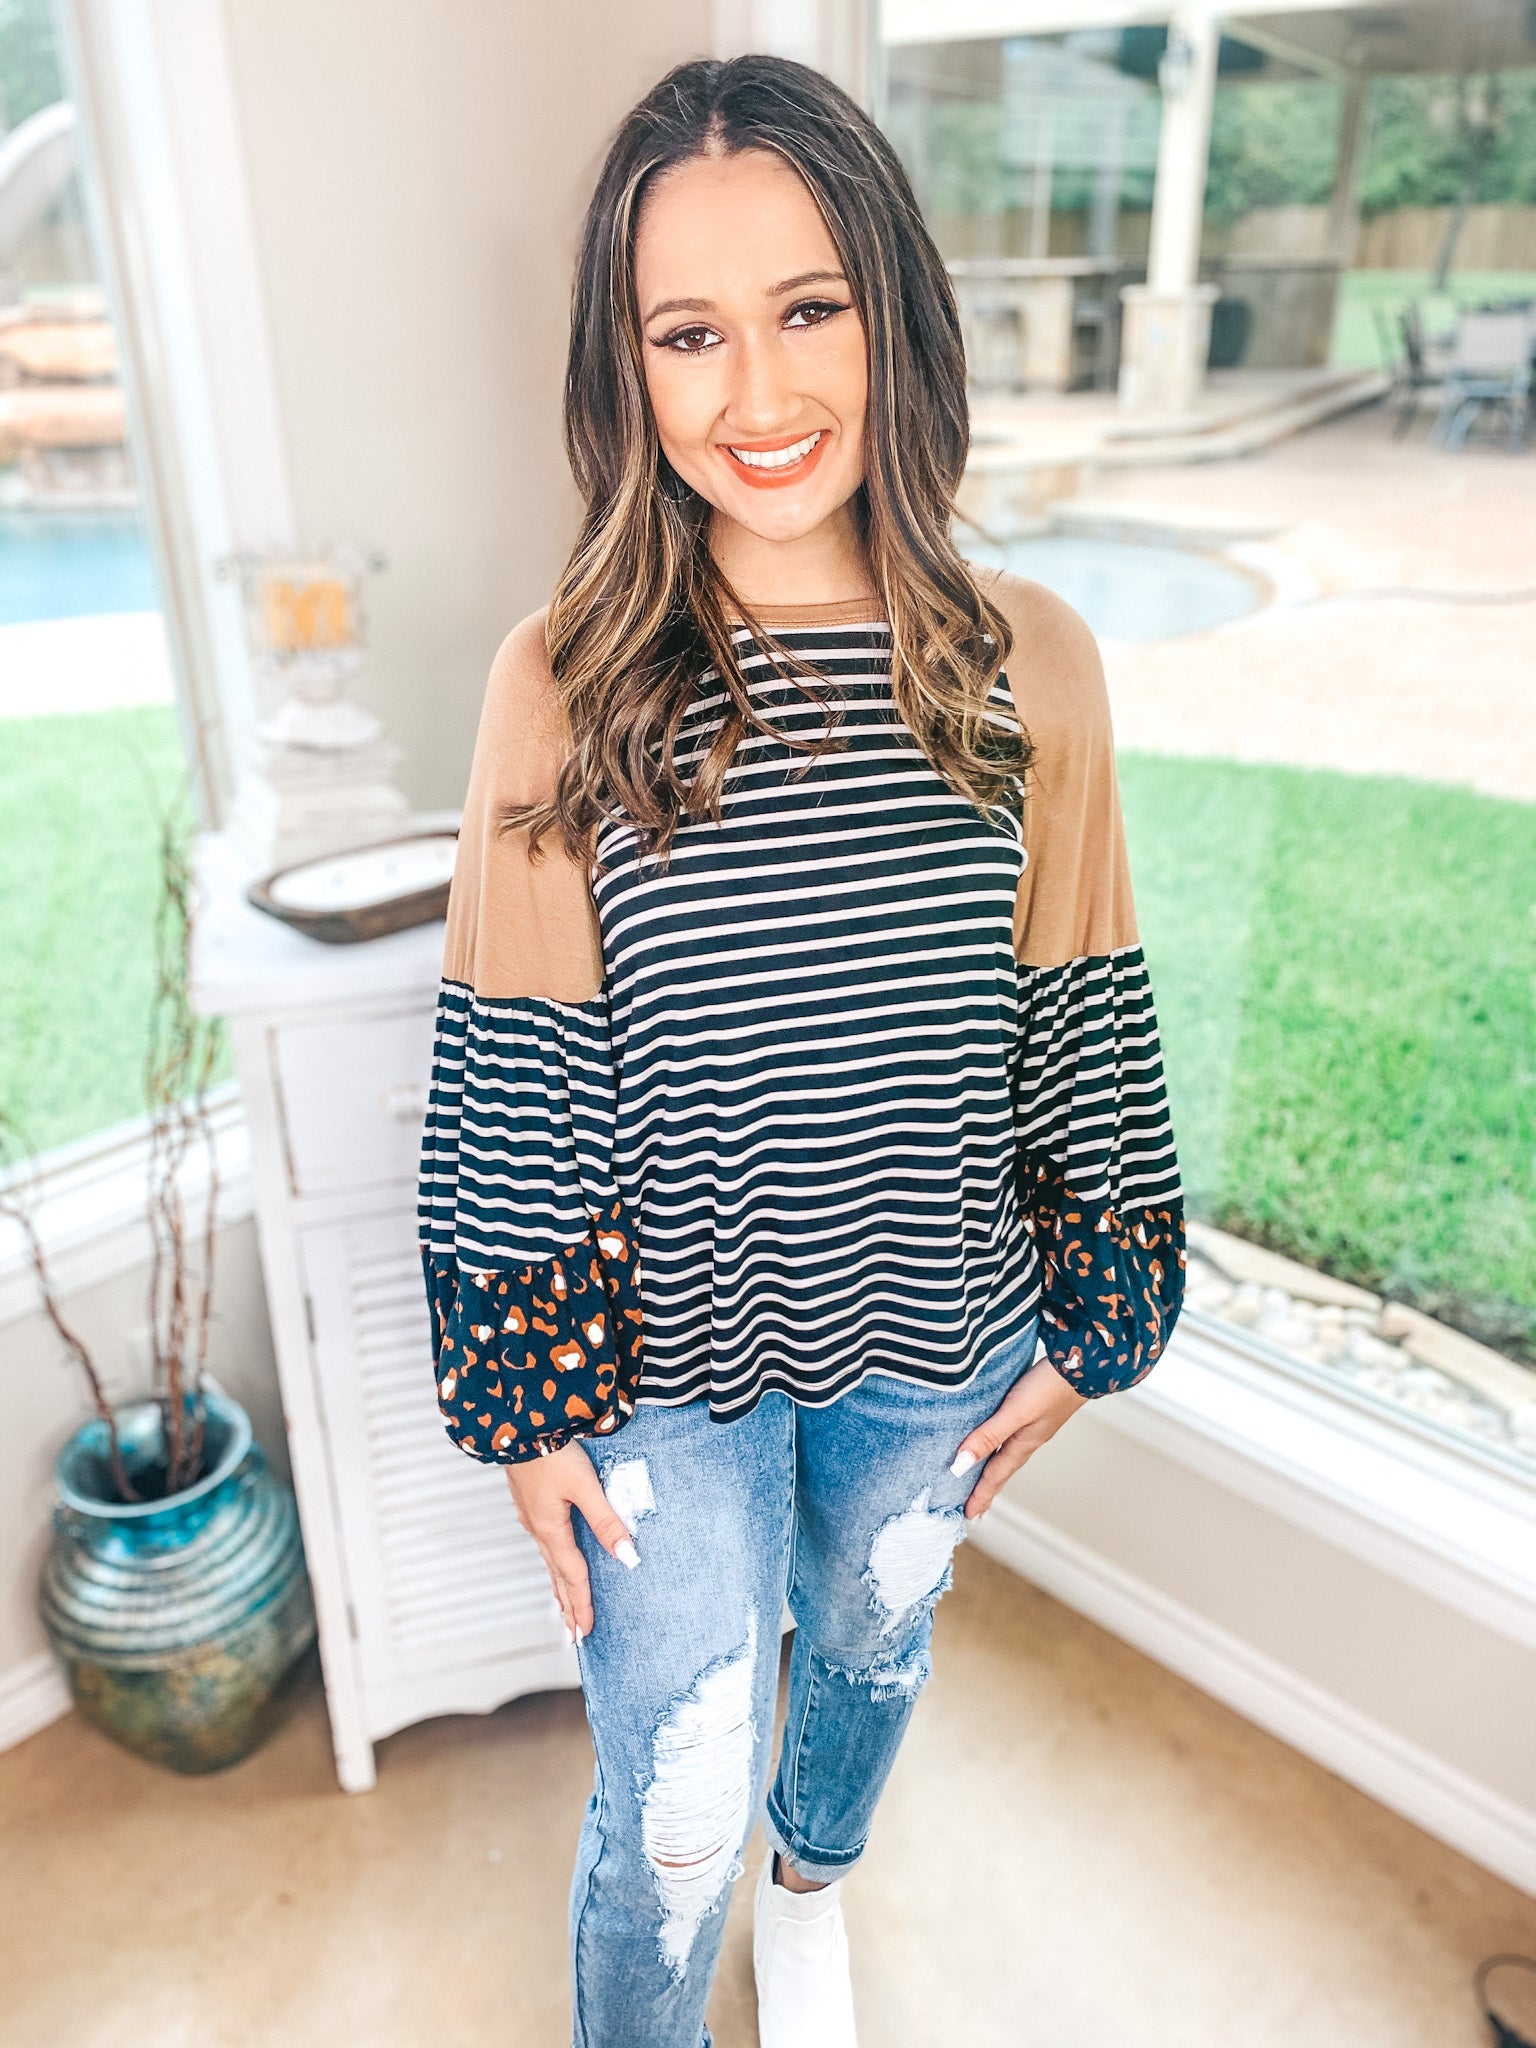 No Looking Back Striped Top with Multi Print Puff Sleeves in Black and Tan - Giddy Up Glamour Boutique